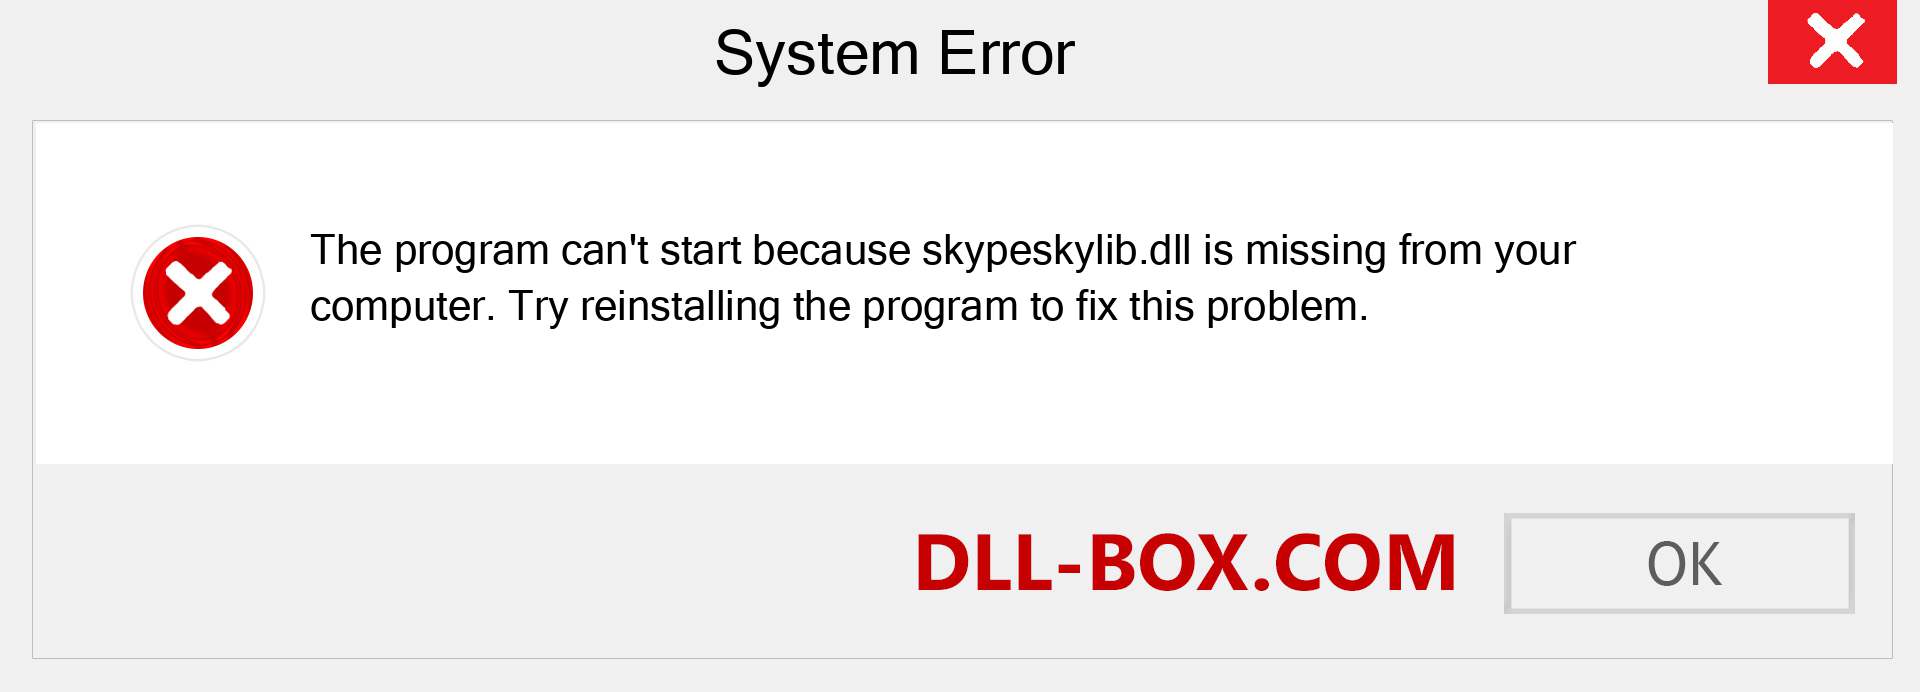  skypeskylib.dll file is missing?. Download for Windows 7, 8, 10 - Fix  skypeskylib dll Missing Error on Windows, photos, images